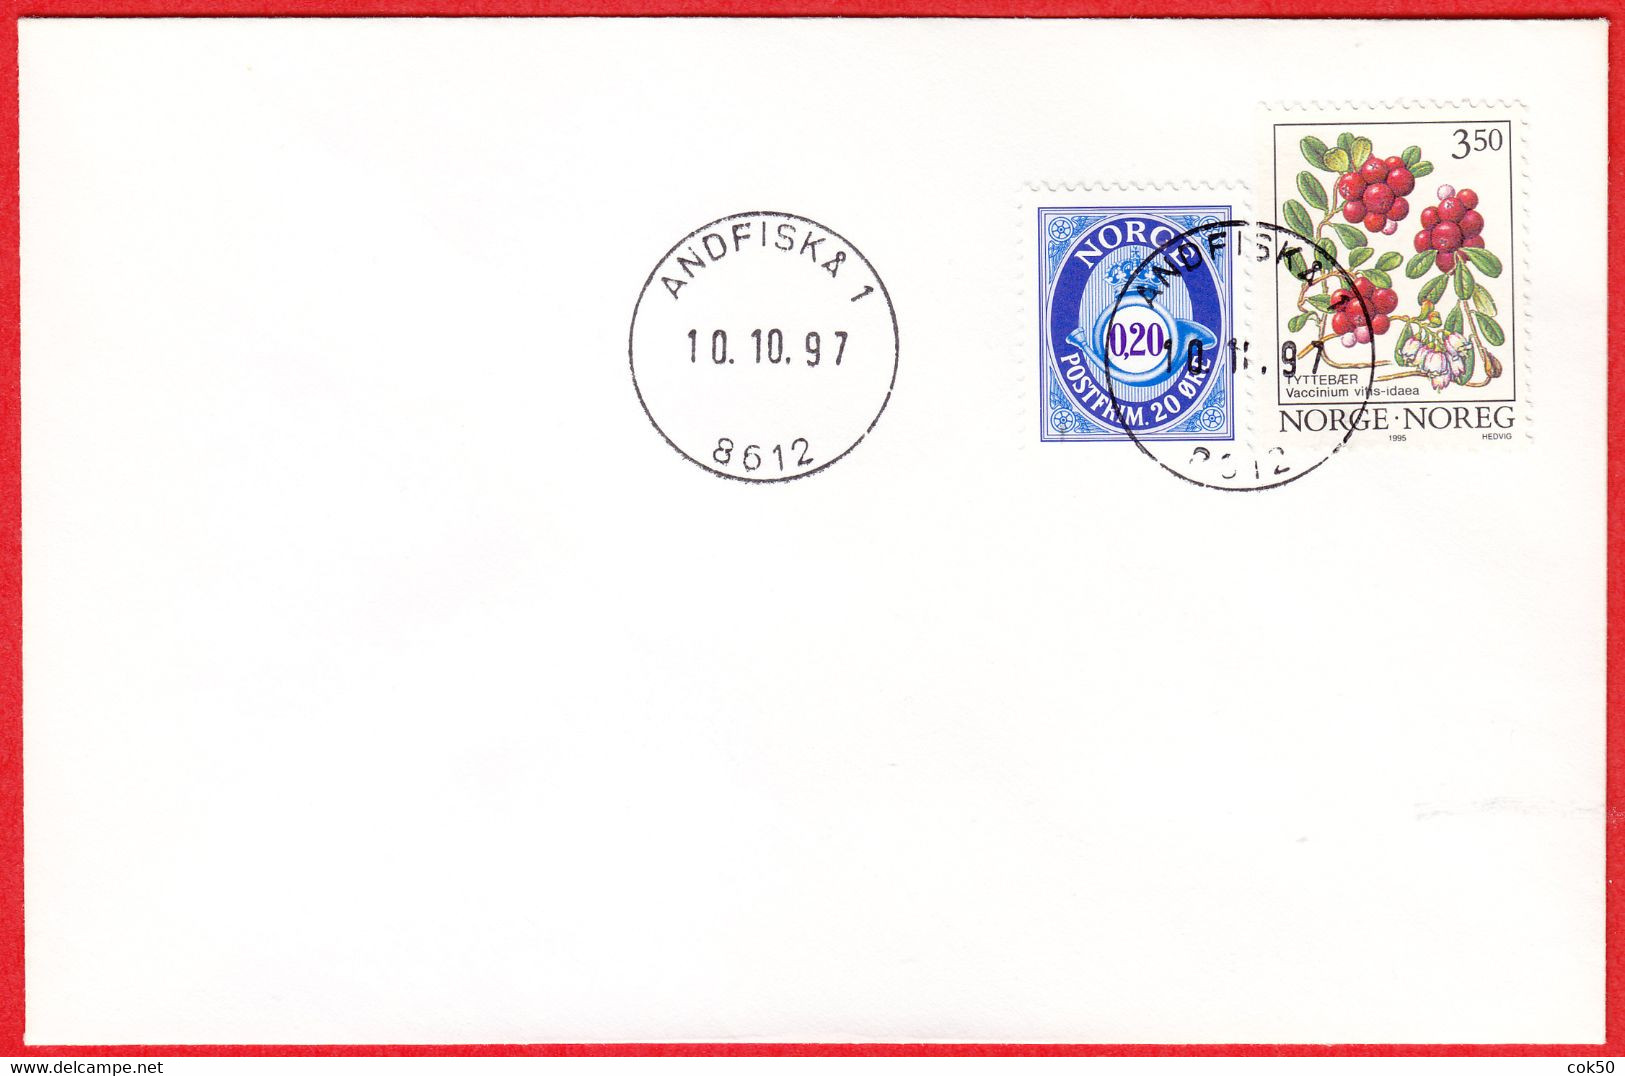 NORWAY -  8612 ANDFISKÅ 1 - 24 MmØ - (Nordland County) - Last Day/postoffice Closed On 1997.10.10 - Local Post Stamps